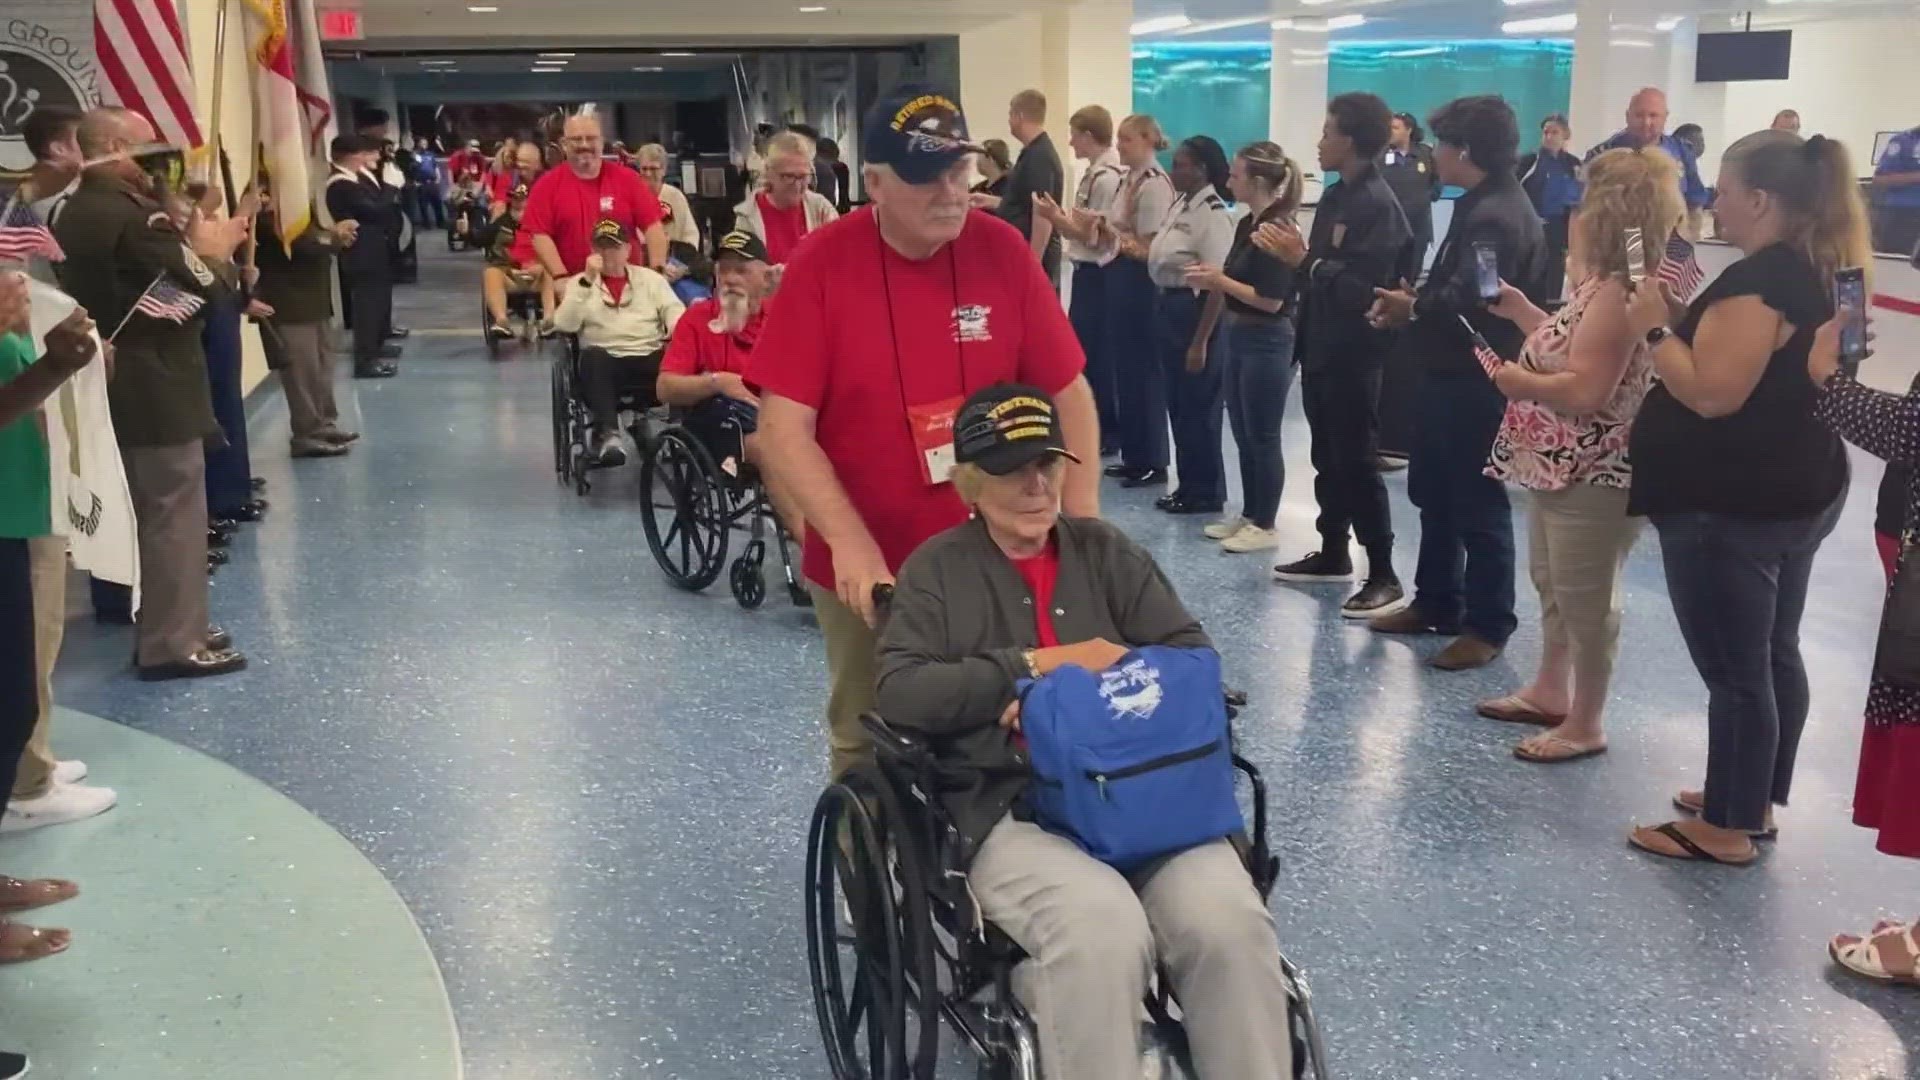 On Saturday, dozens of military veterans left Jacksonville on a flight to Washington D.C. for a day full of fun activities. They were applauded as they came back.